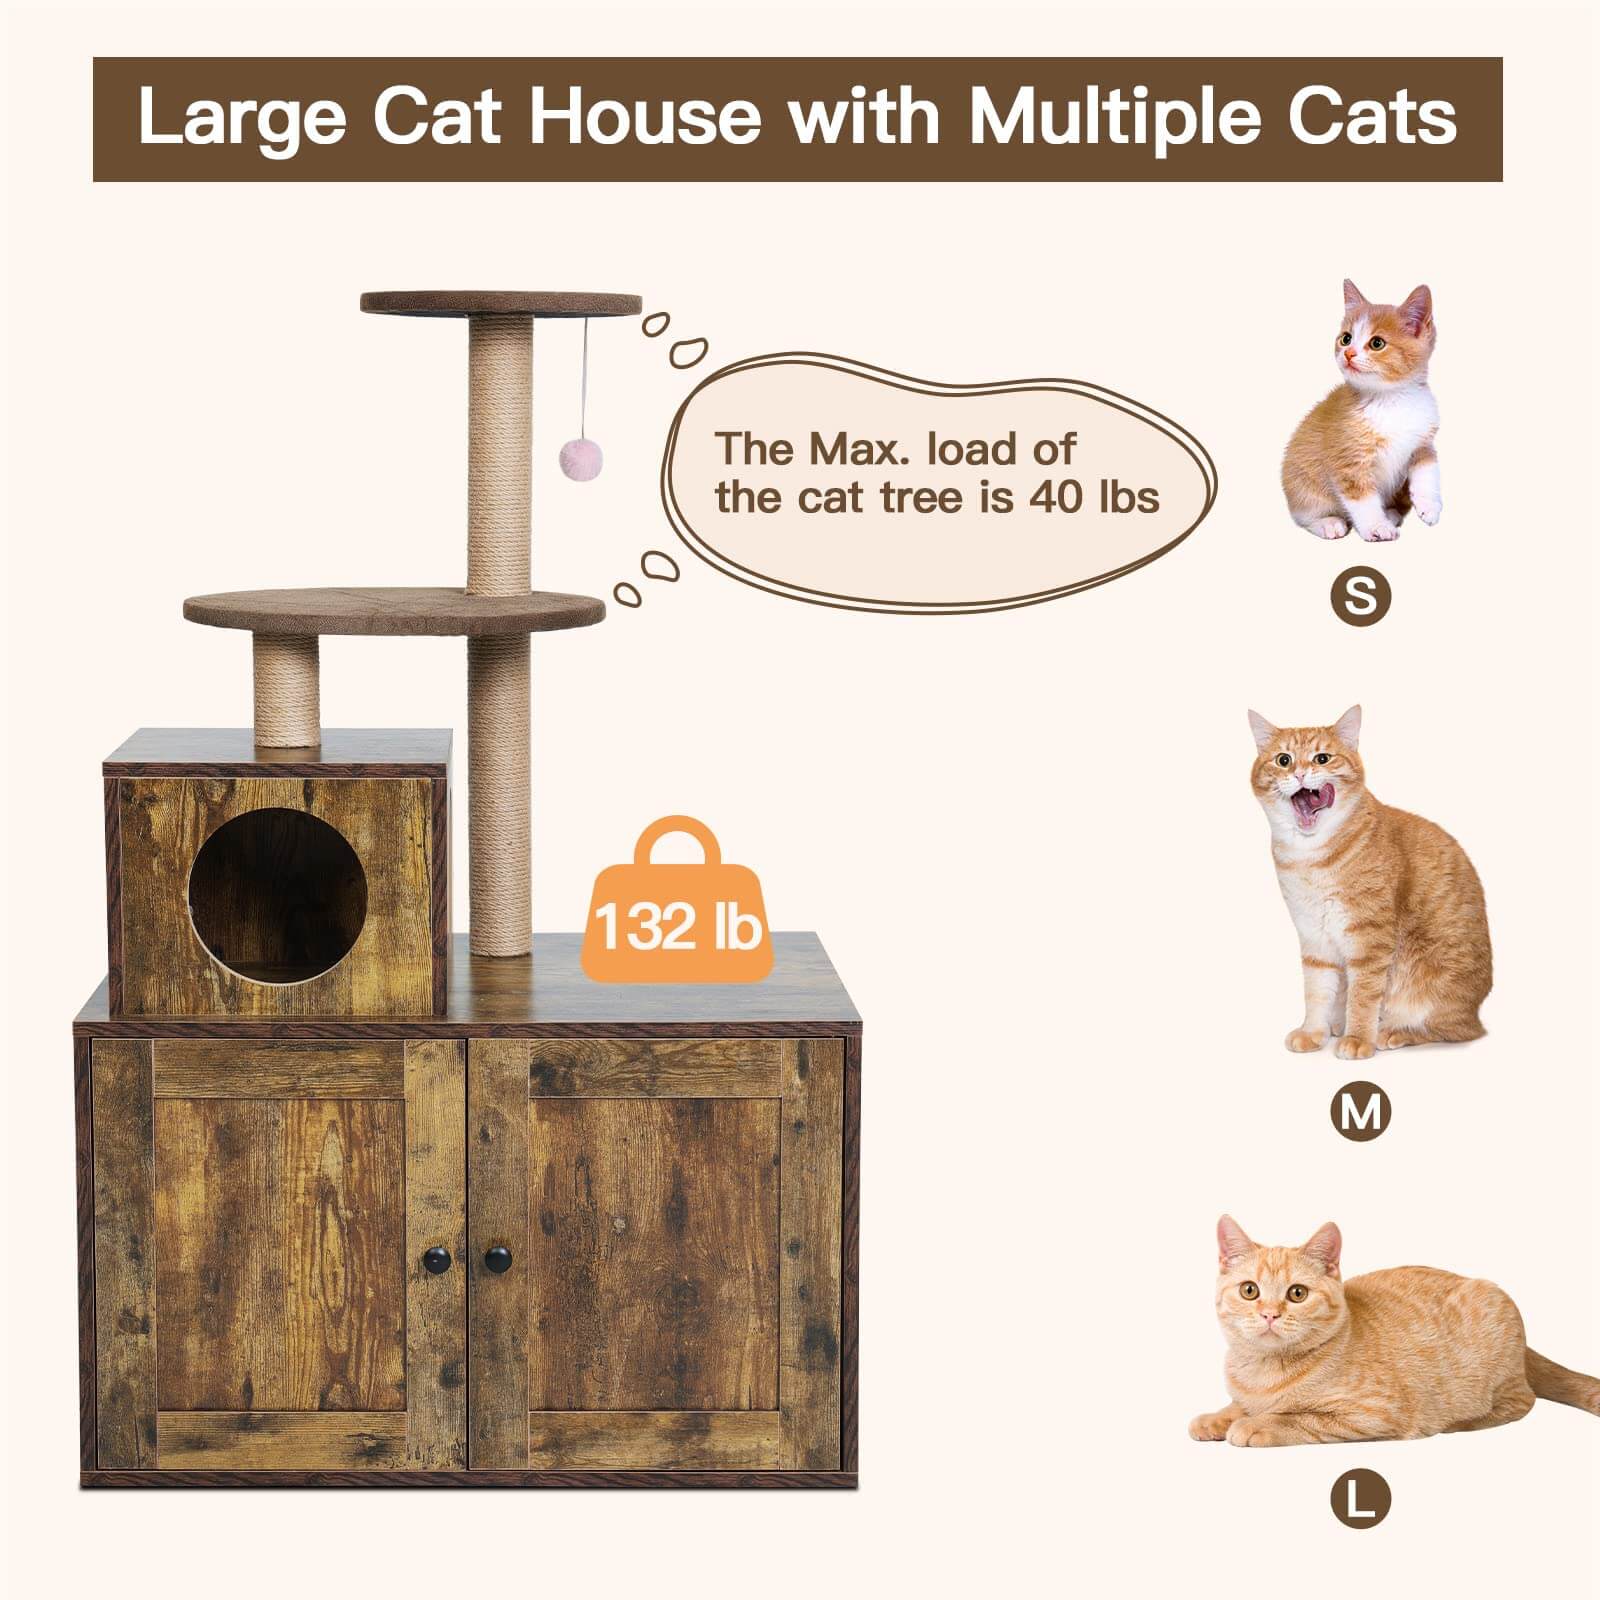 Cat Tree Cat Tower for Indoor Cats is a large house with multiple cats